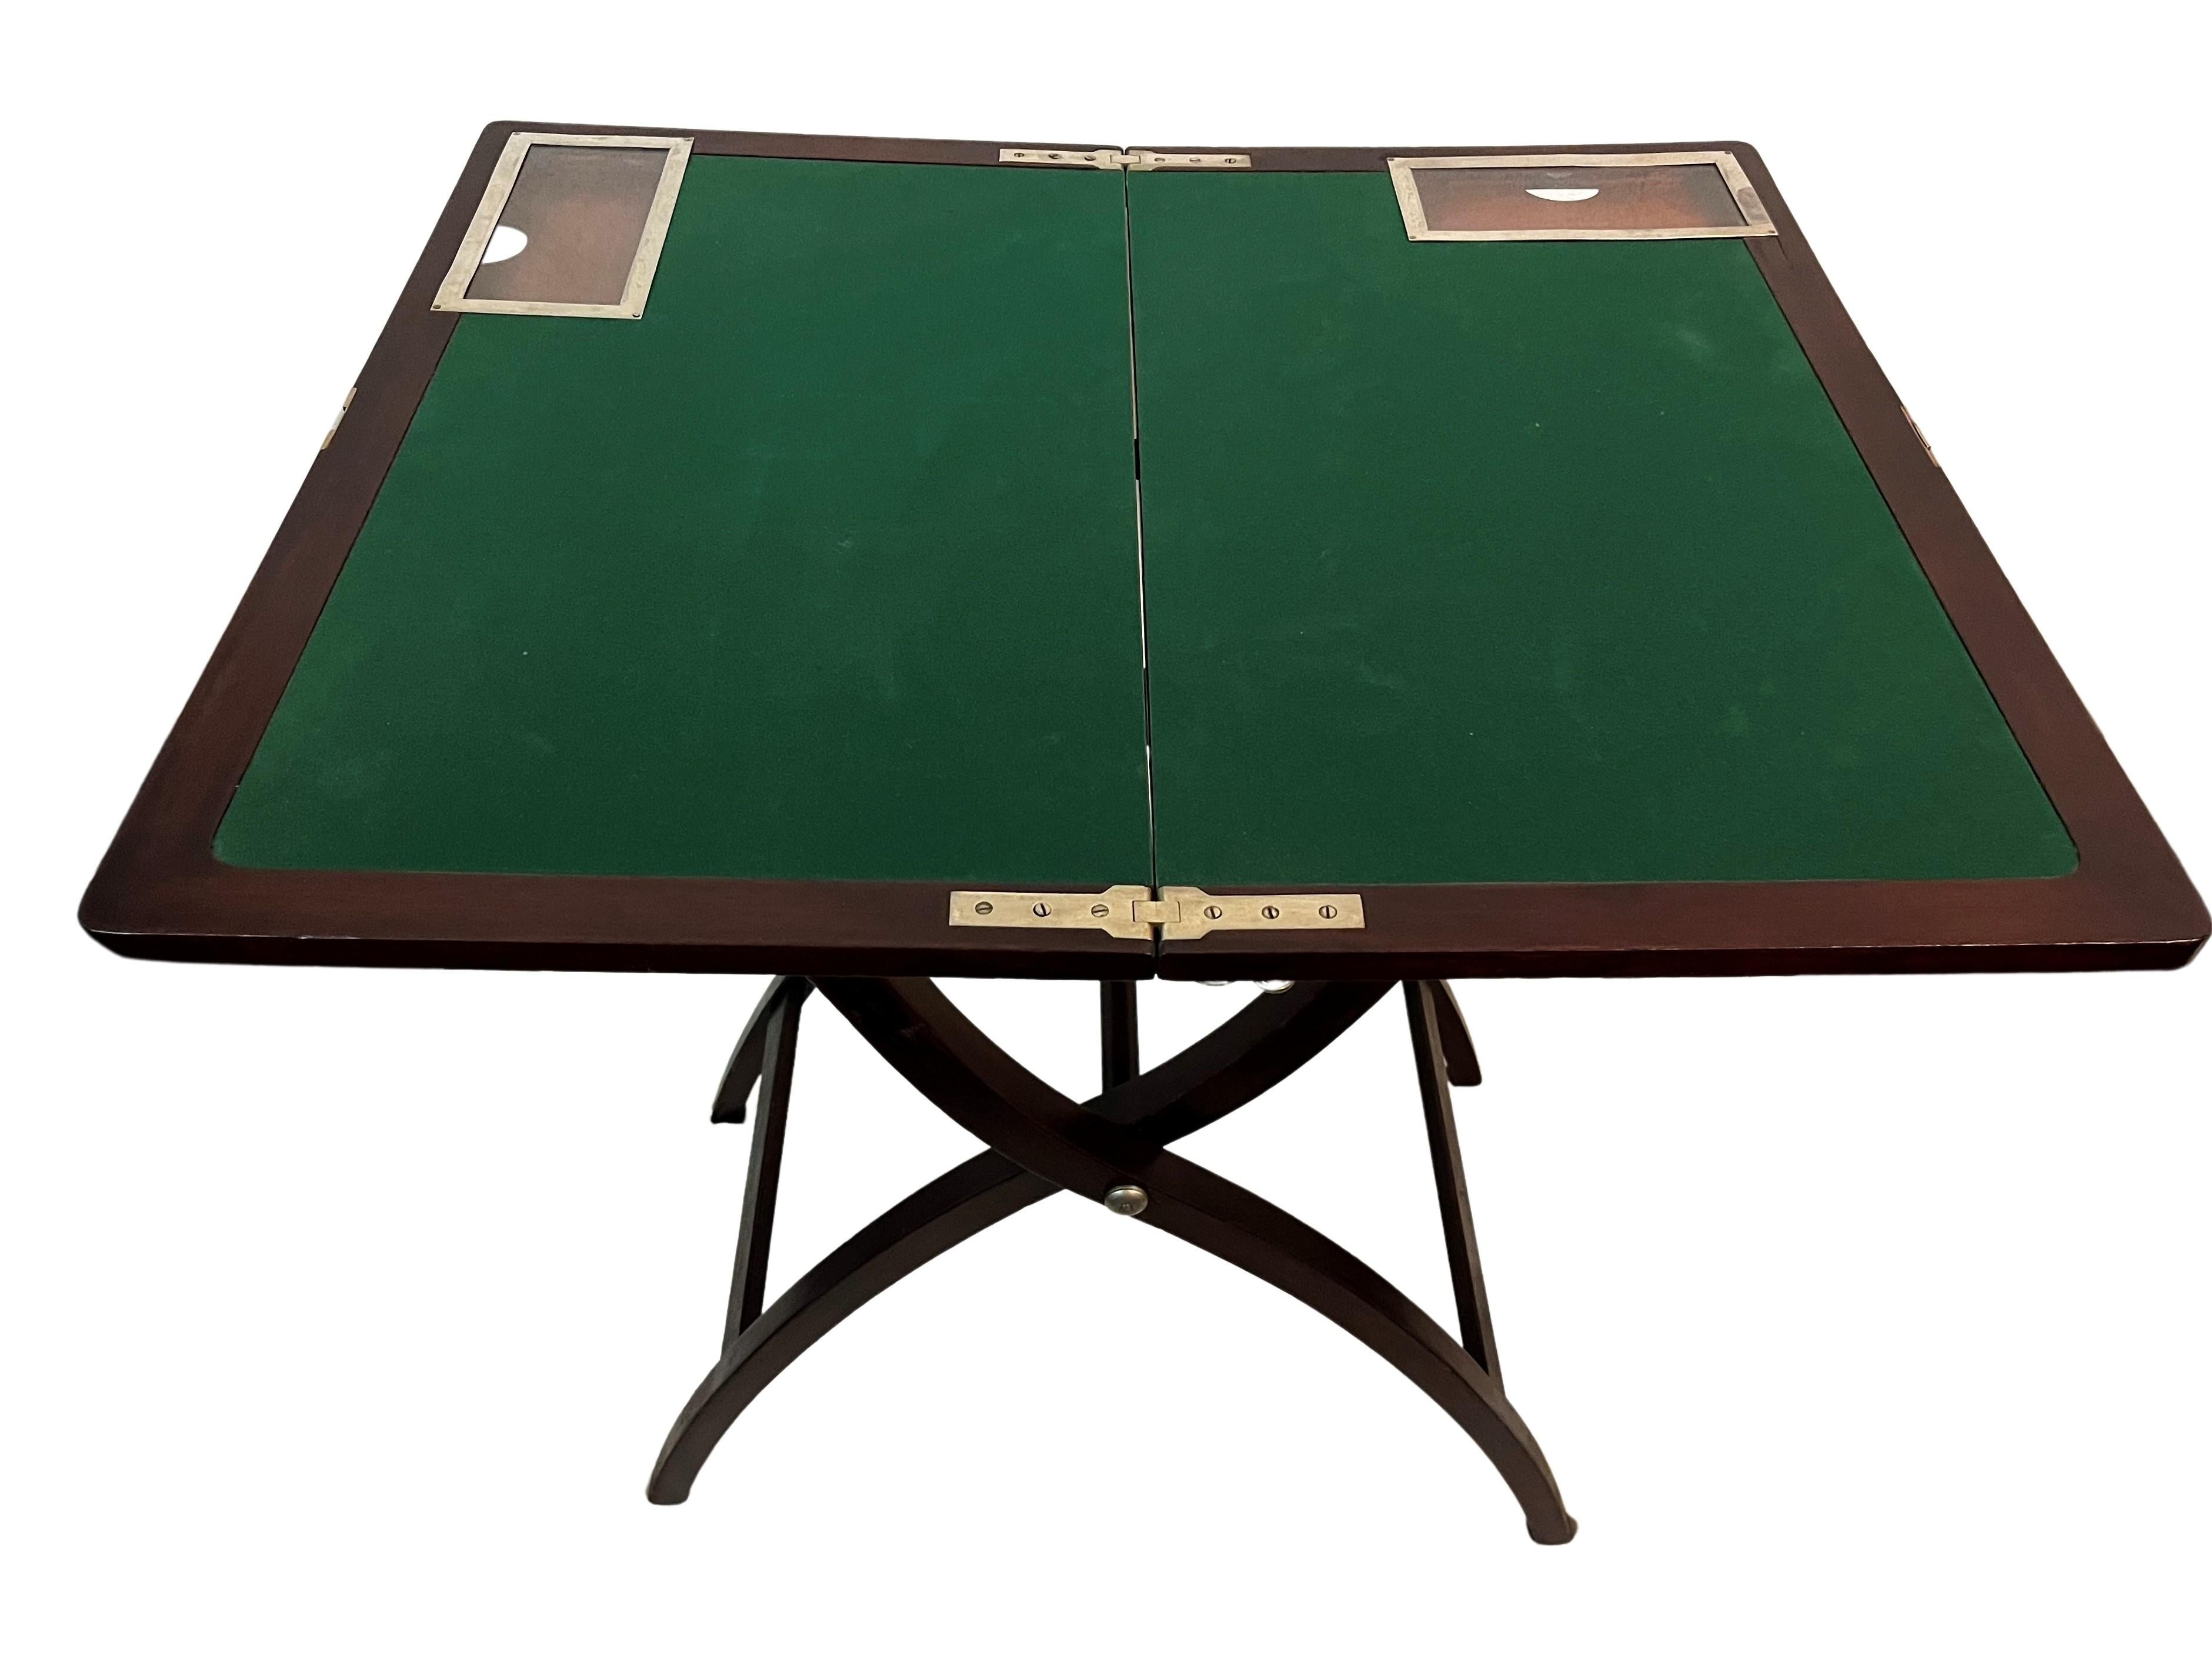 Very rare gaming table, with a fascinatingly executed folding mechanism. This object was made in England, around 1920, in the Art Deco period.

When unfolded, a playing surface appears that is lined with green felt. There are two small drawers,